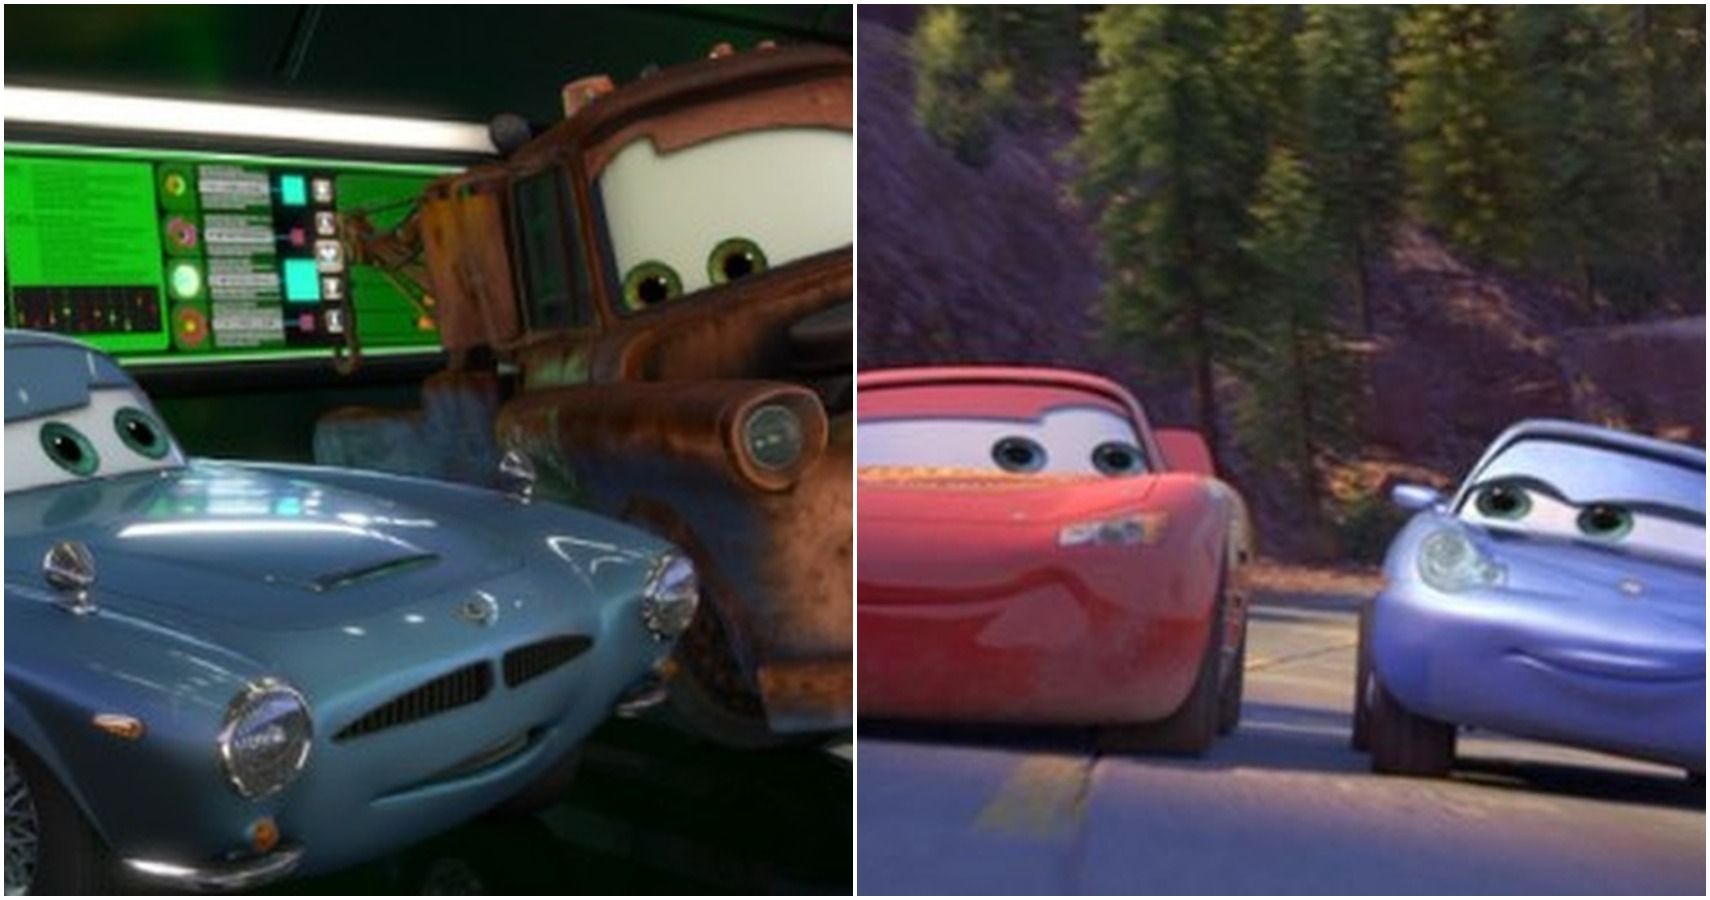 Cars 4 10 Stories We Could See In A Sequel